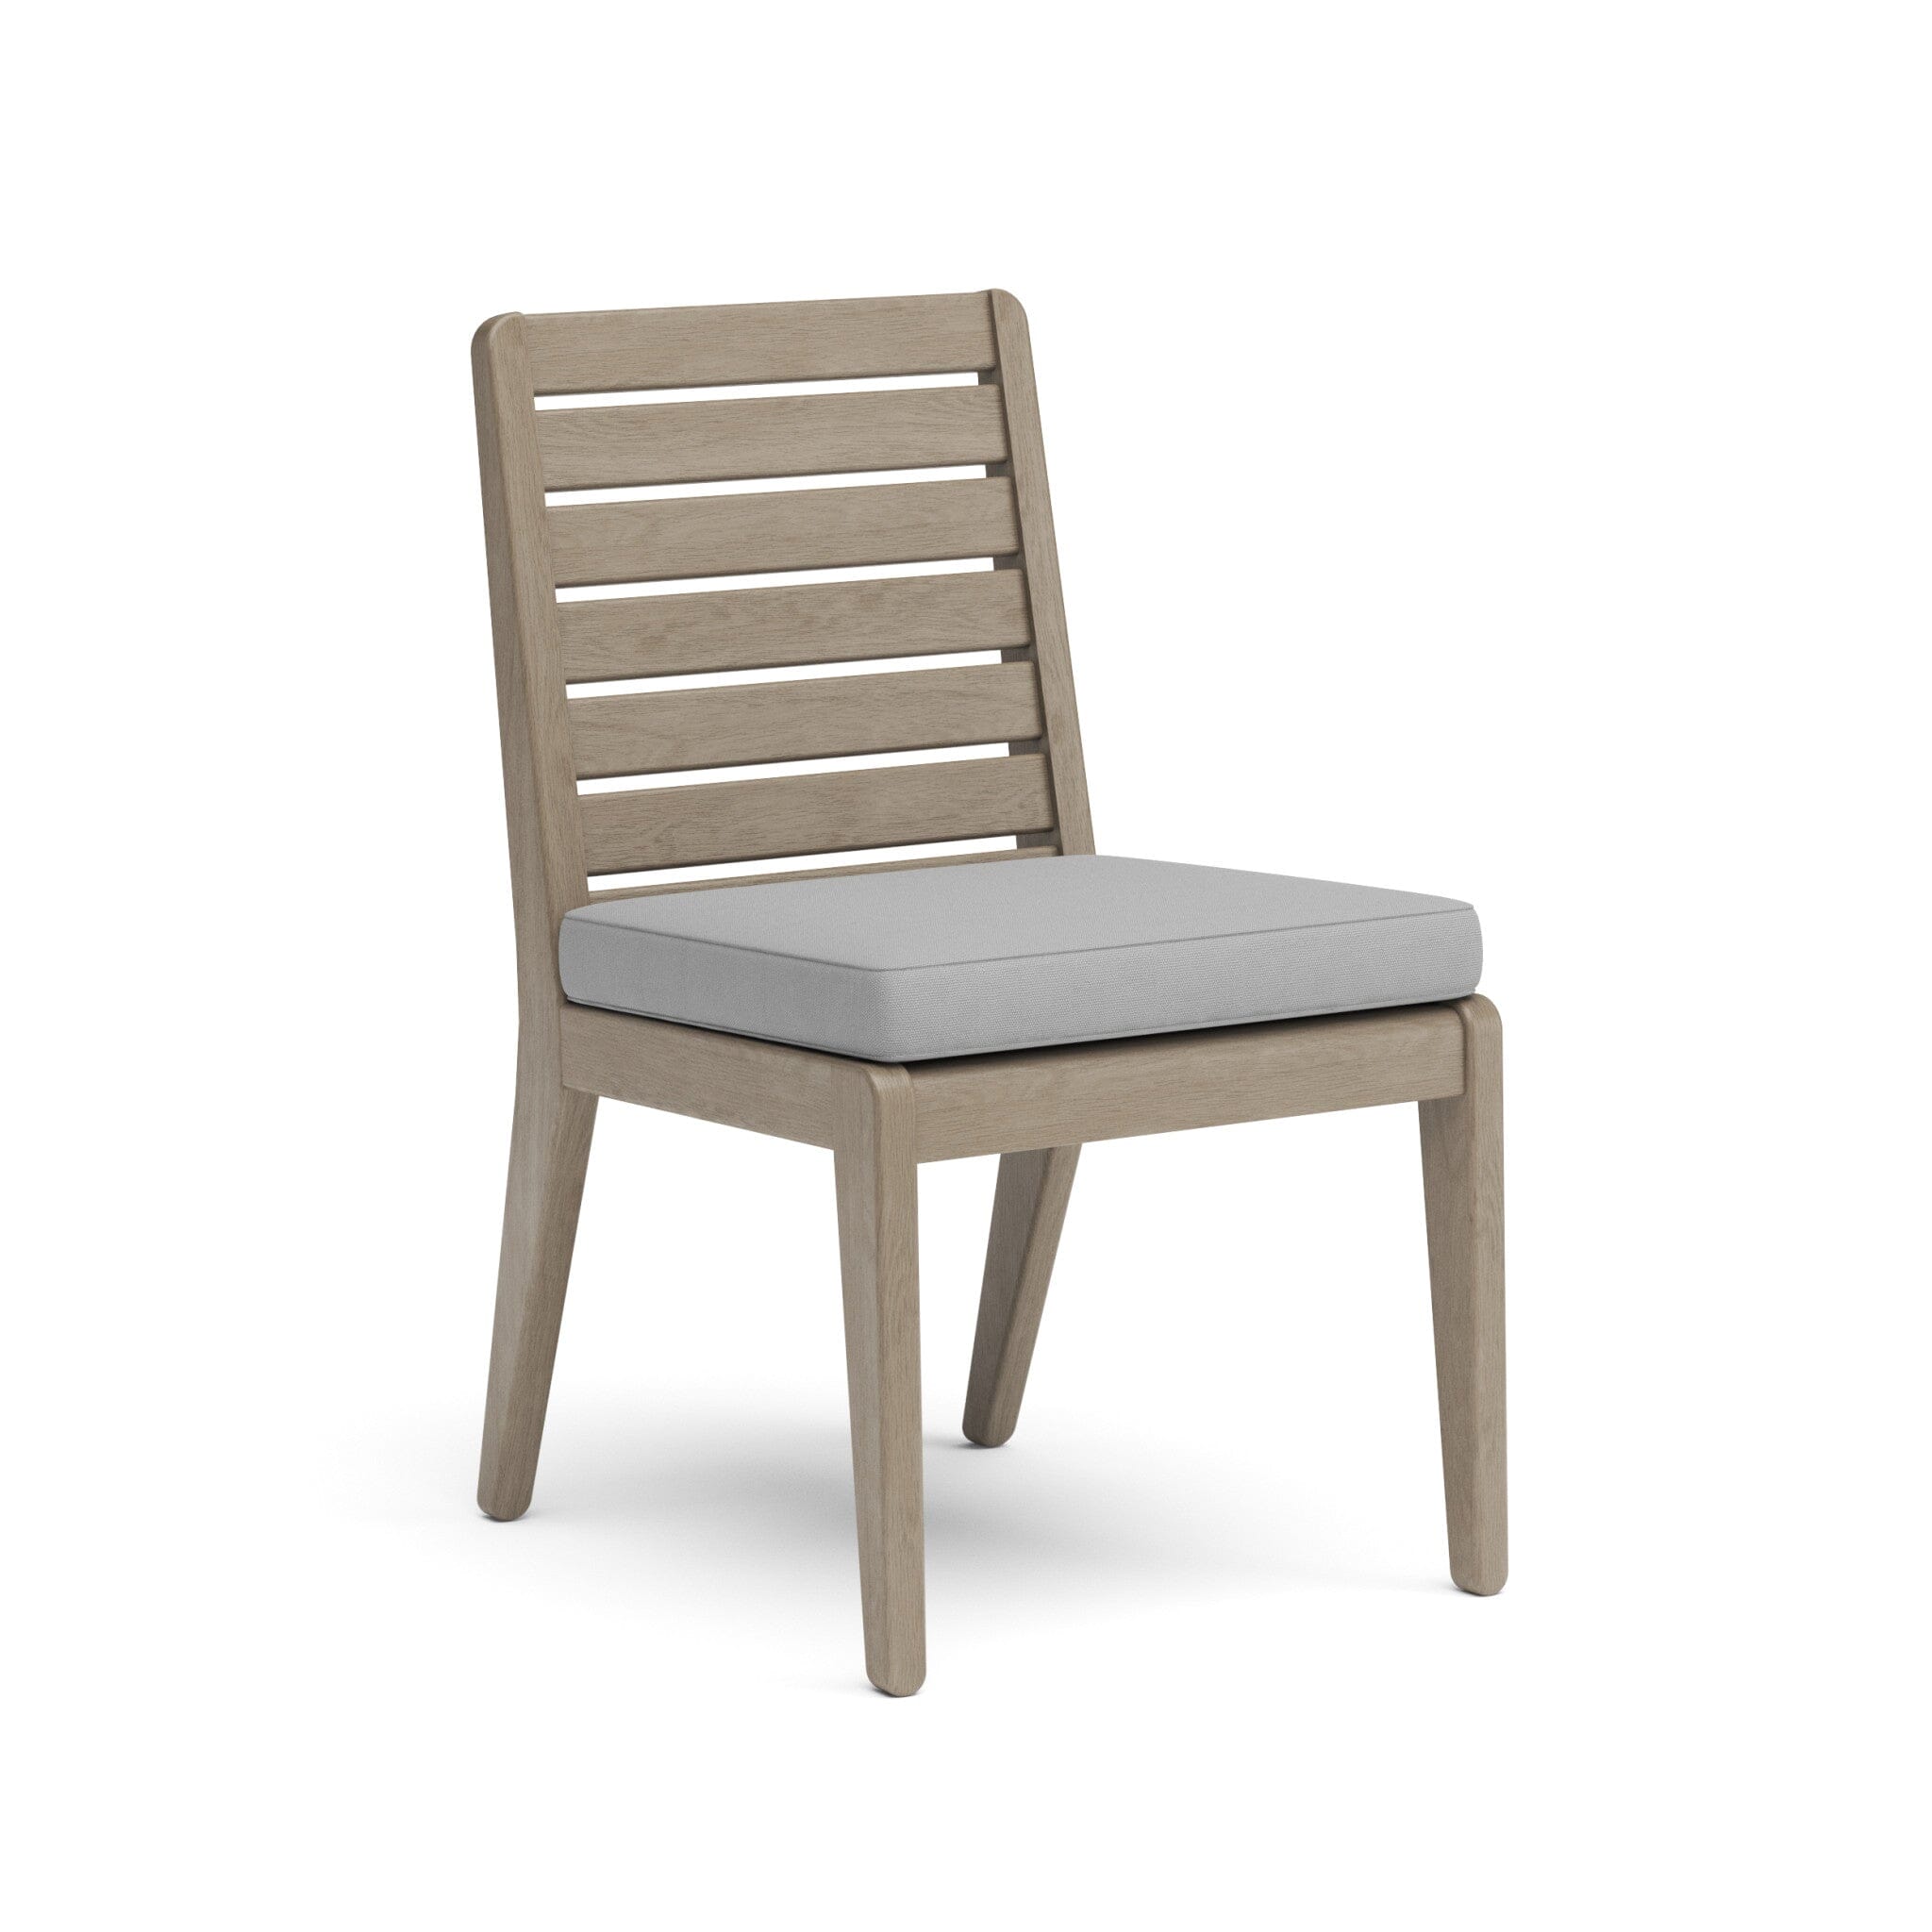 Transitional Outdoor Dining Chair Pair By Sustain Outdoor Dining Chair Sustain